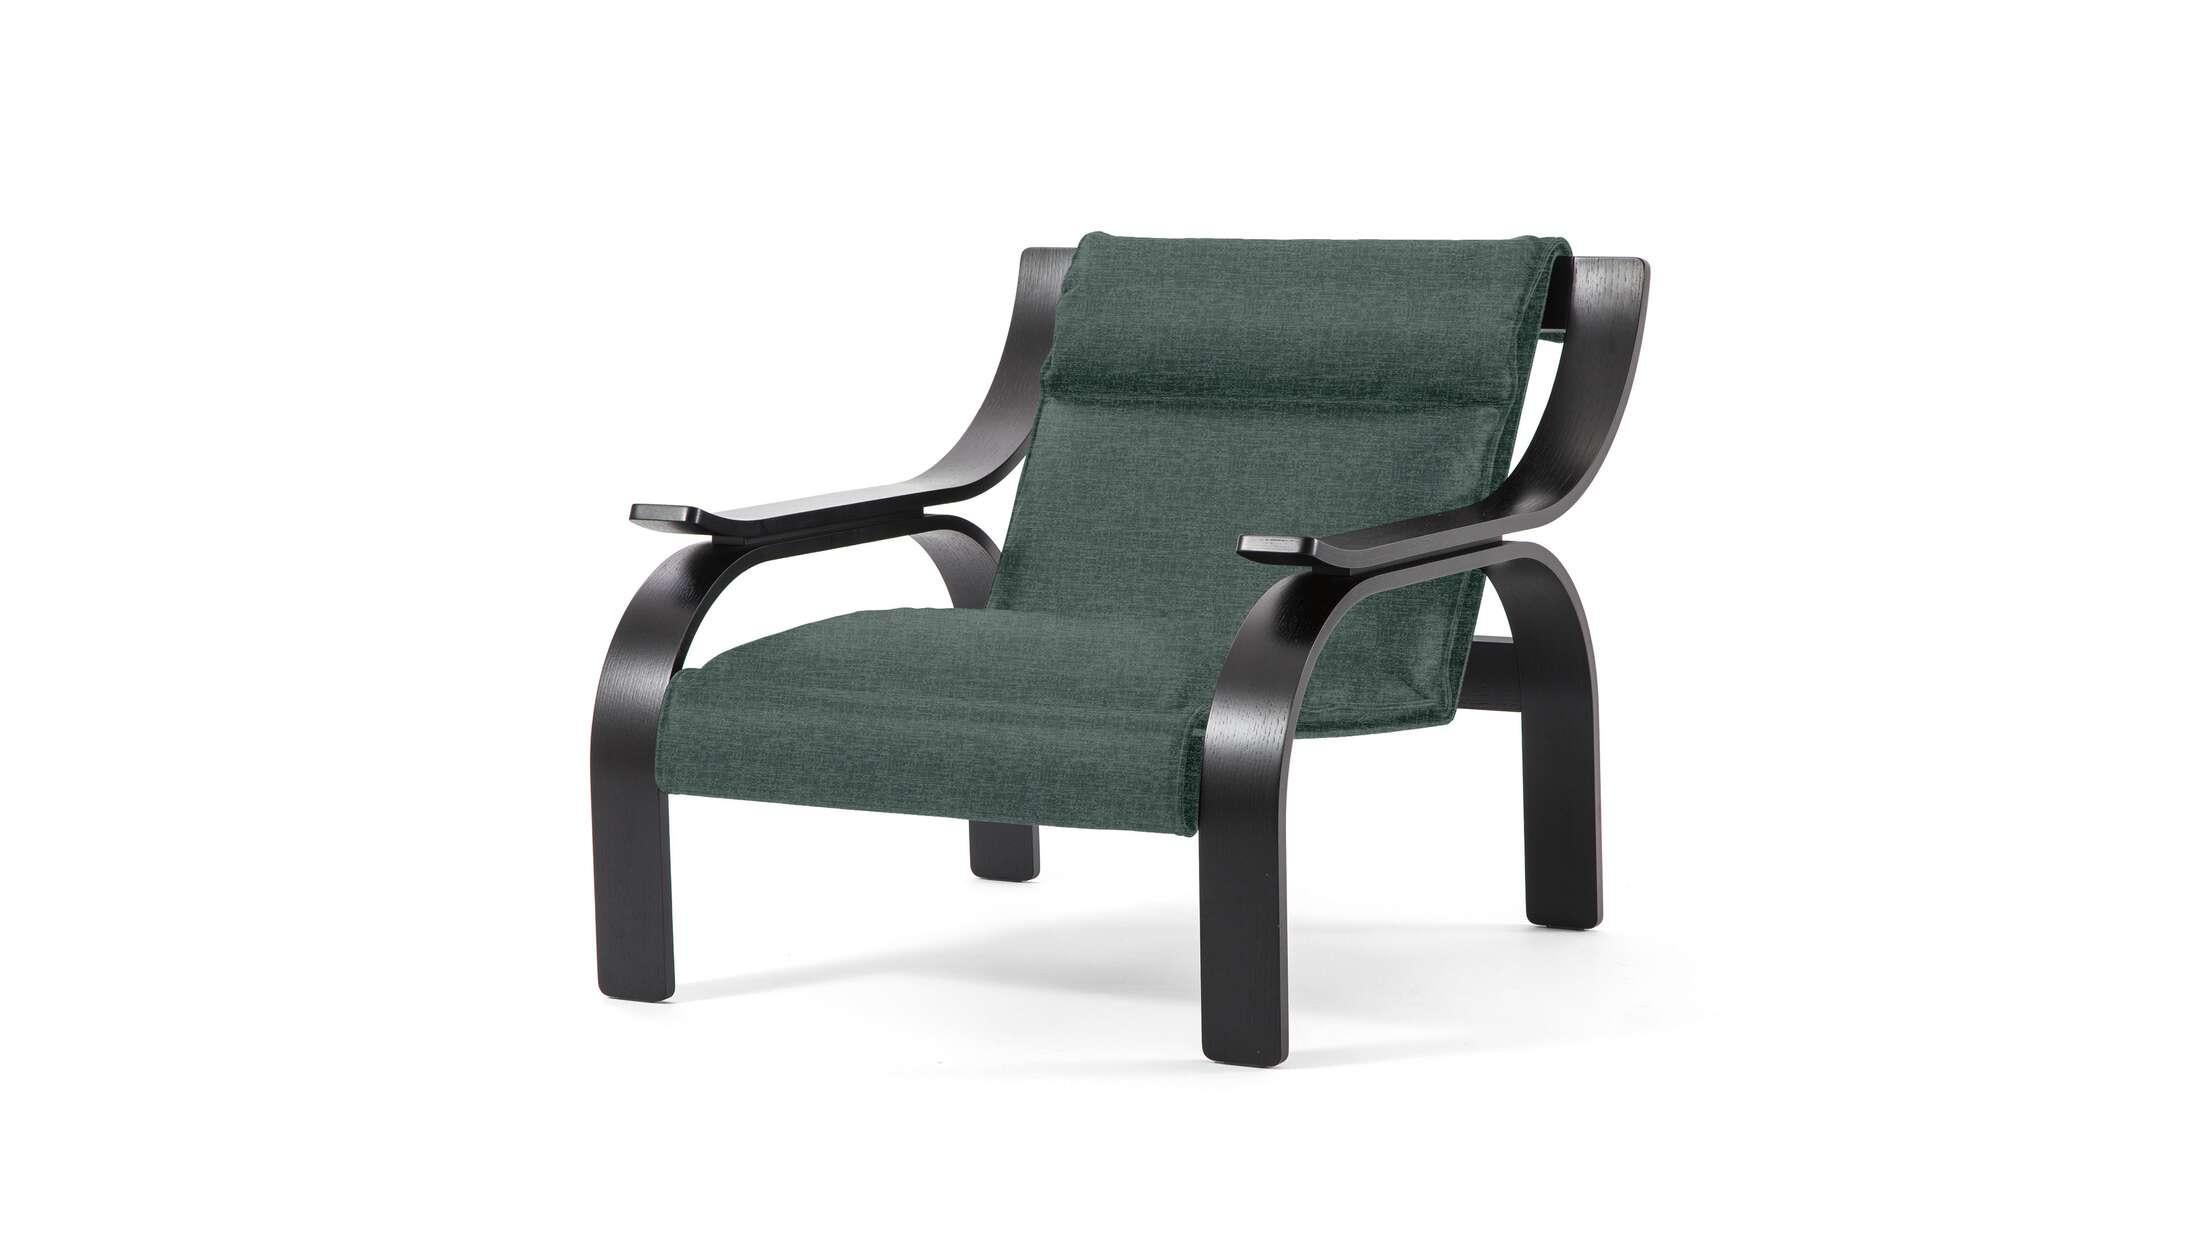 Prices vary dependent on the chosen material/color. Armchair designed by Marco Zanuso in 1964, relaunched in 2015. Manufactured by Cassina in Italy. The seat is available in leather or fabric, the base can be made of walnut or black stained ash. 
 